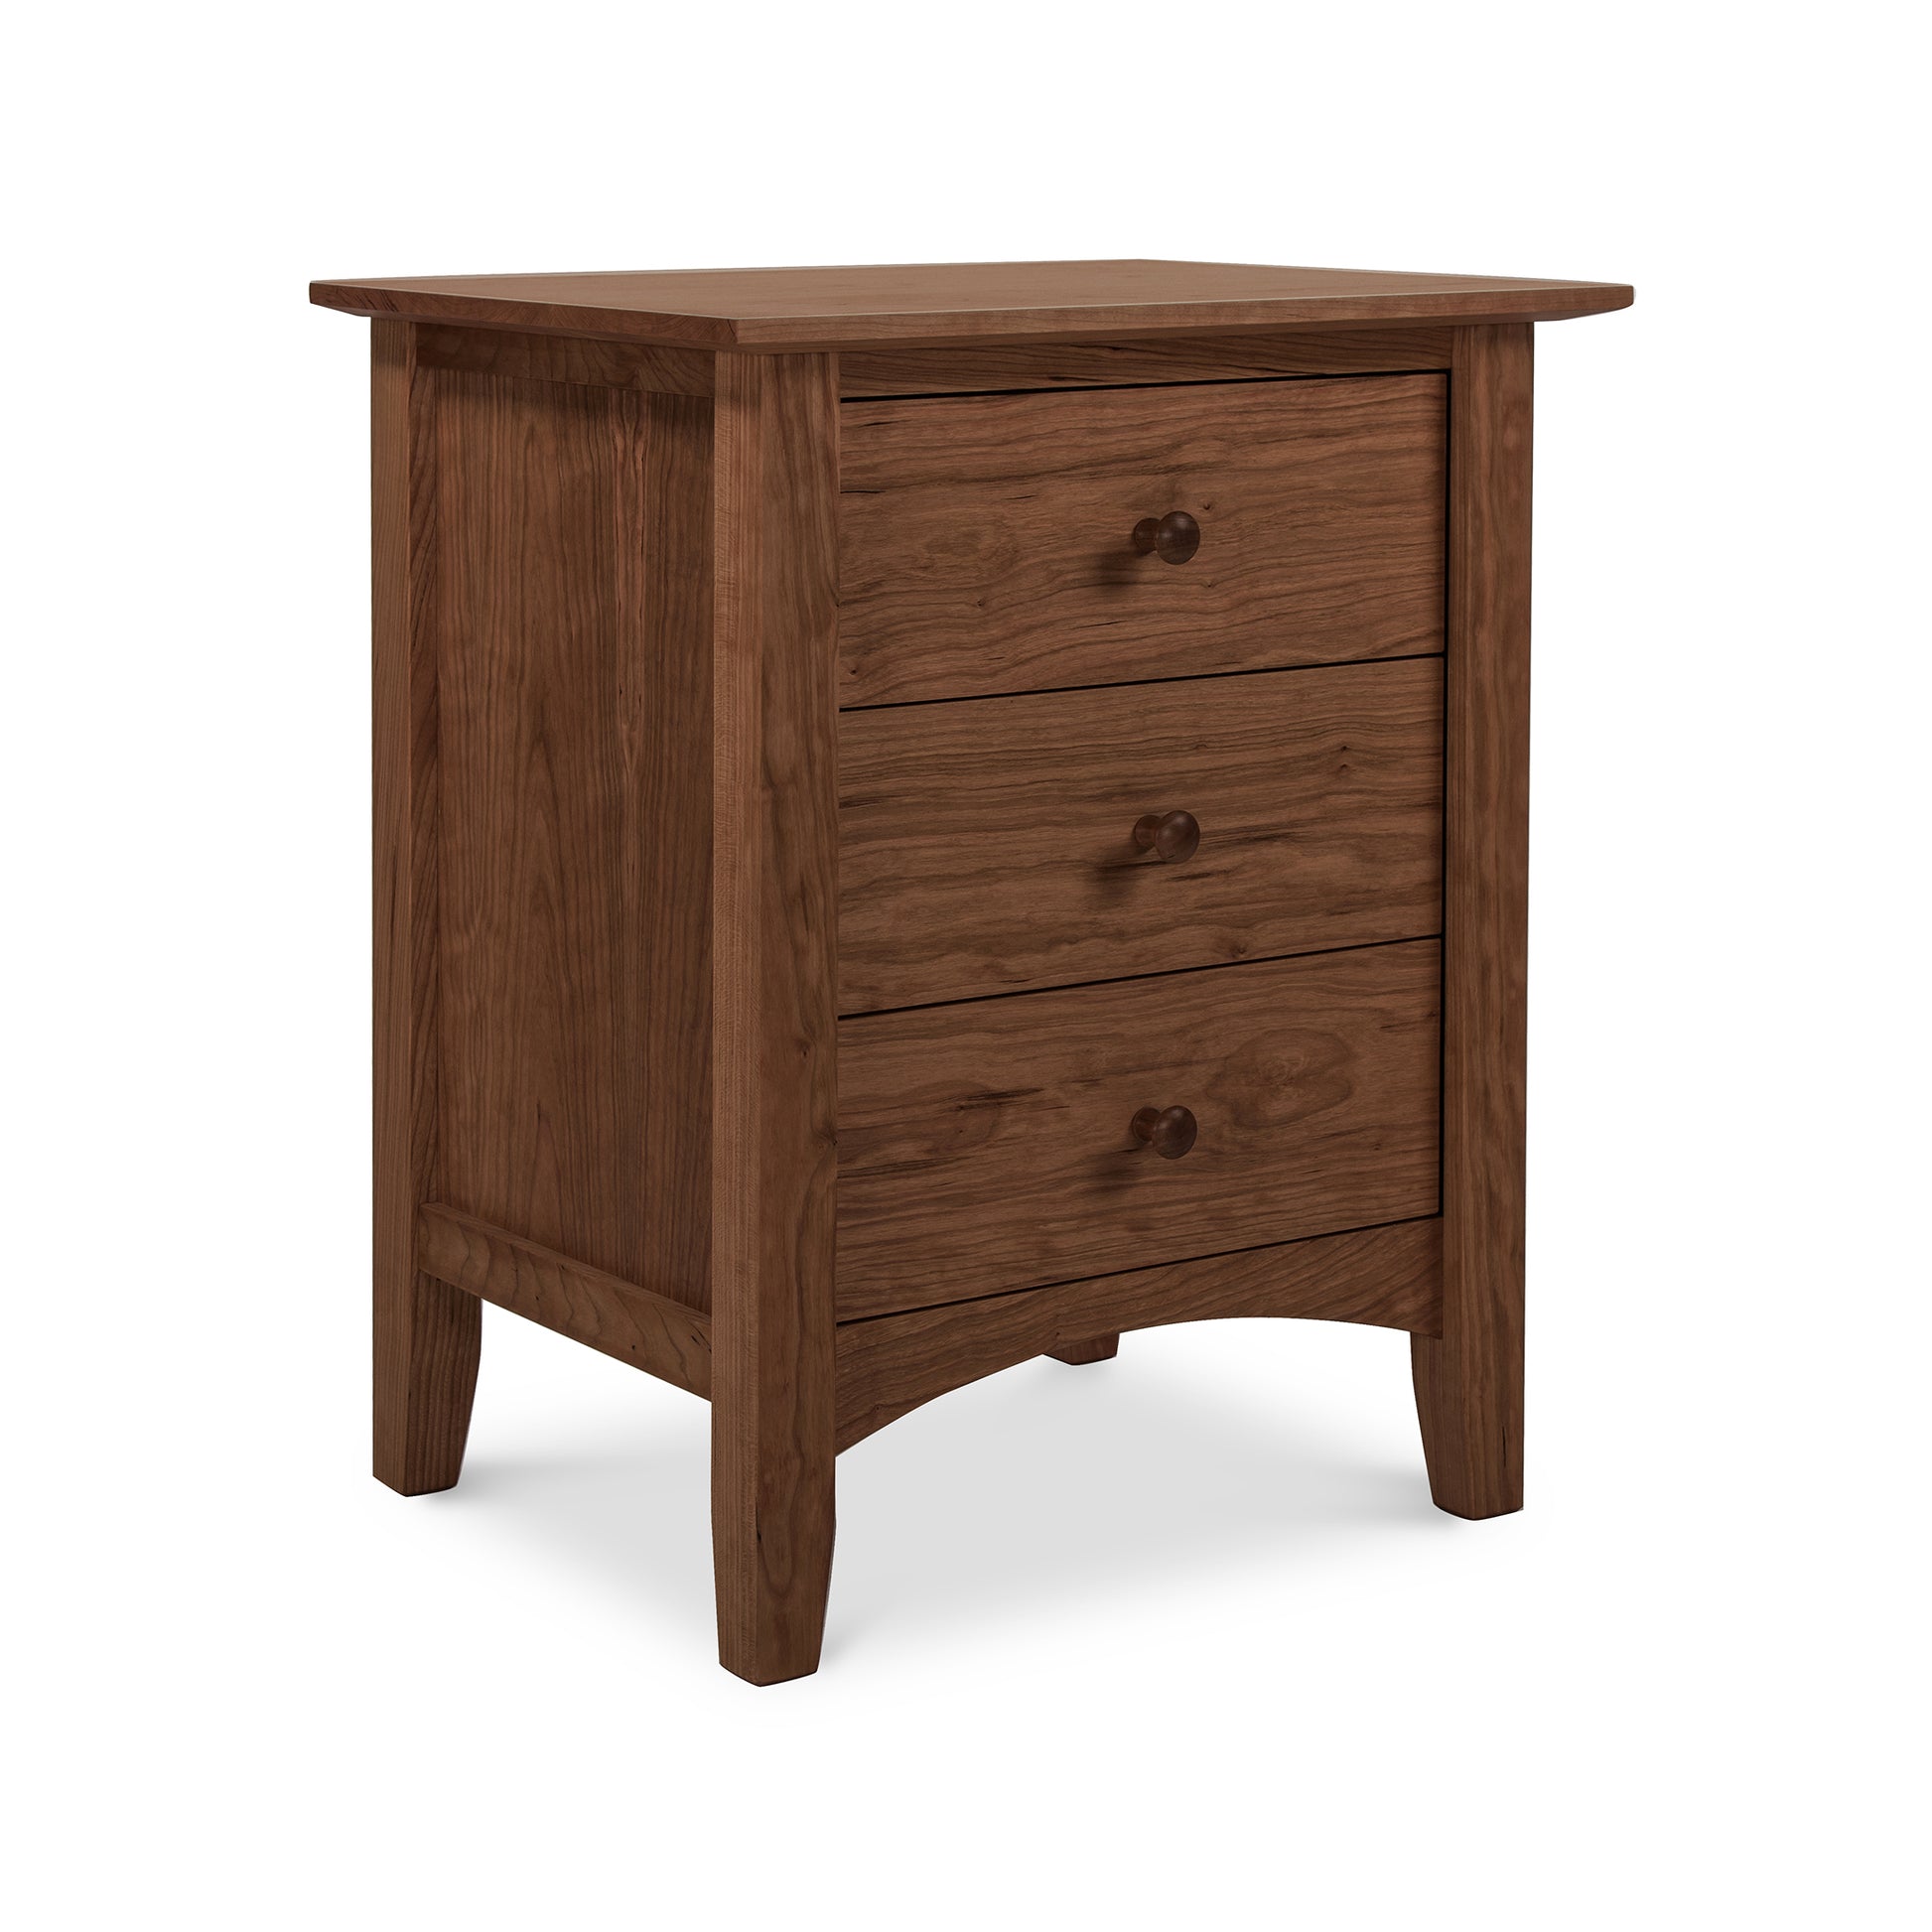 A Maple Corner Woodworks Vermont-crafted American Shaker 3-Drawer Nightstand featuring three drawers with round knobs and slightly slanted legs, photographed against a white background.